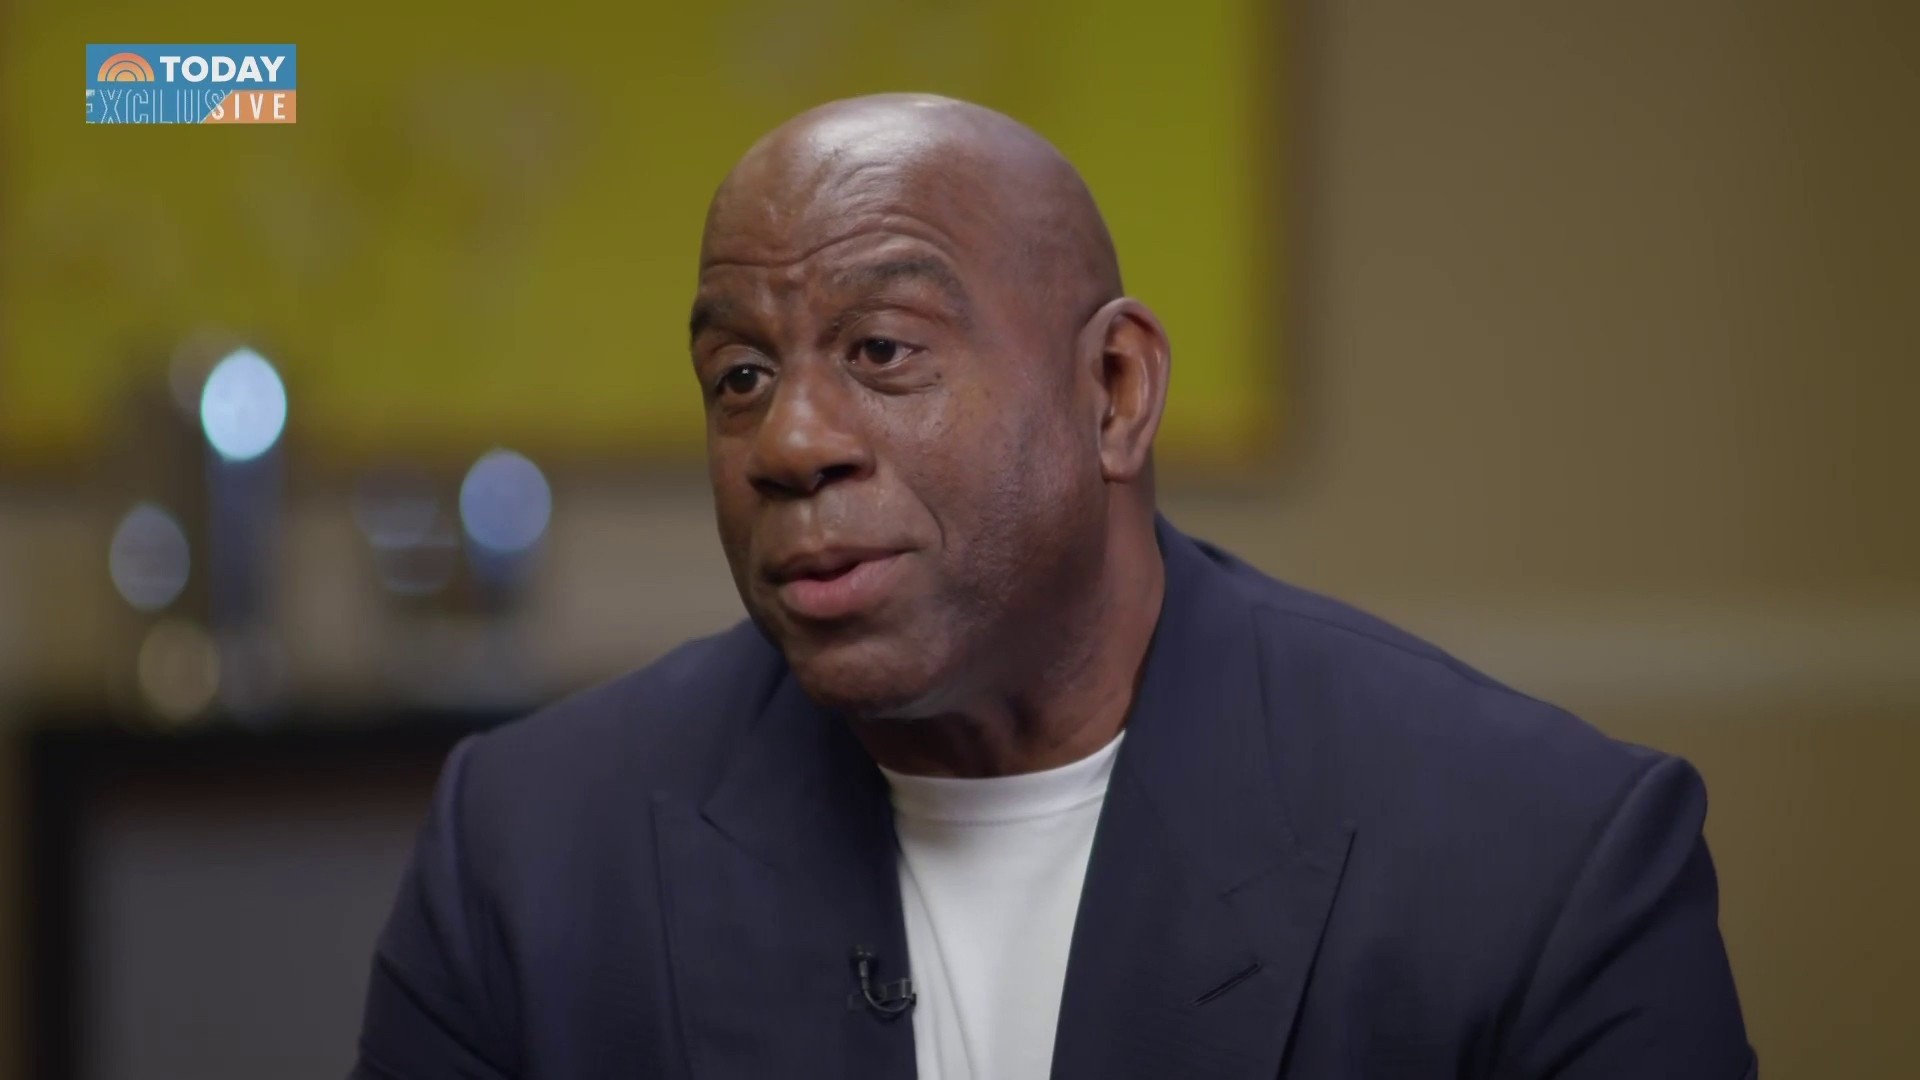 Washington Commanders sale approved with Magic Johnson as co-owner